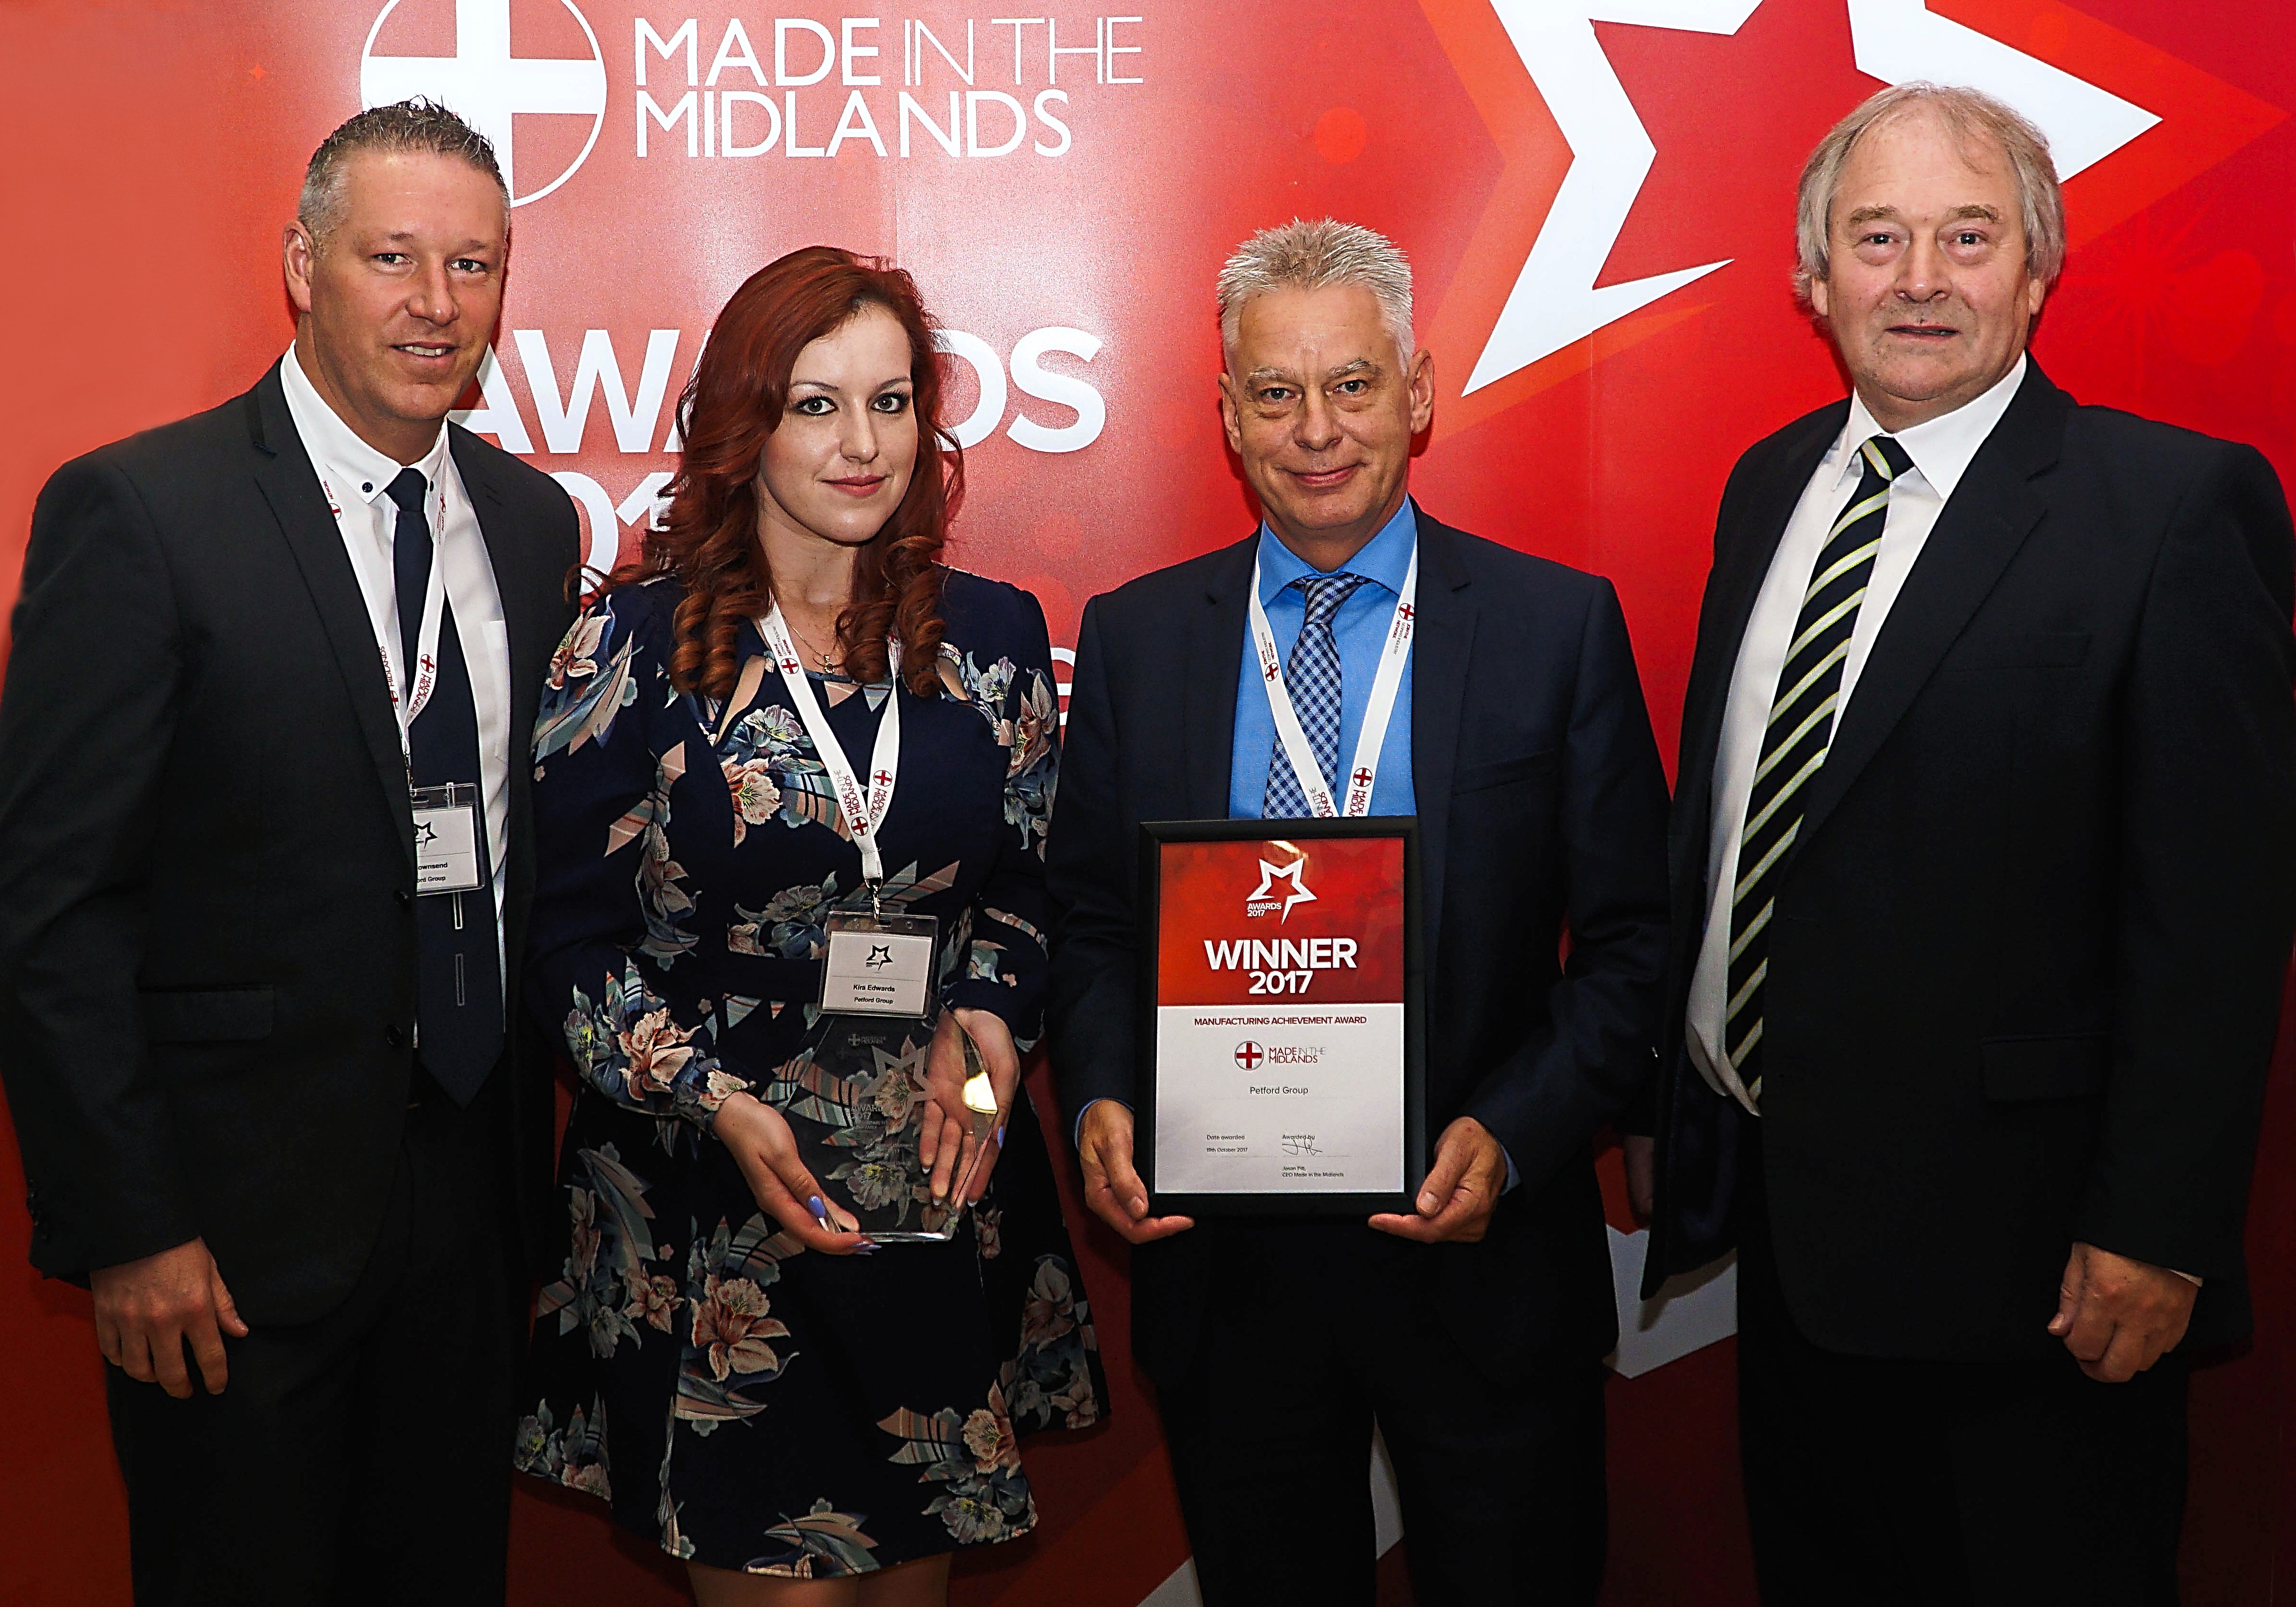 Made in the Midlands - Express & Star Business Awards 2018 Sponsor